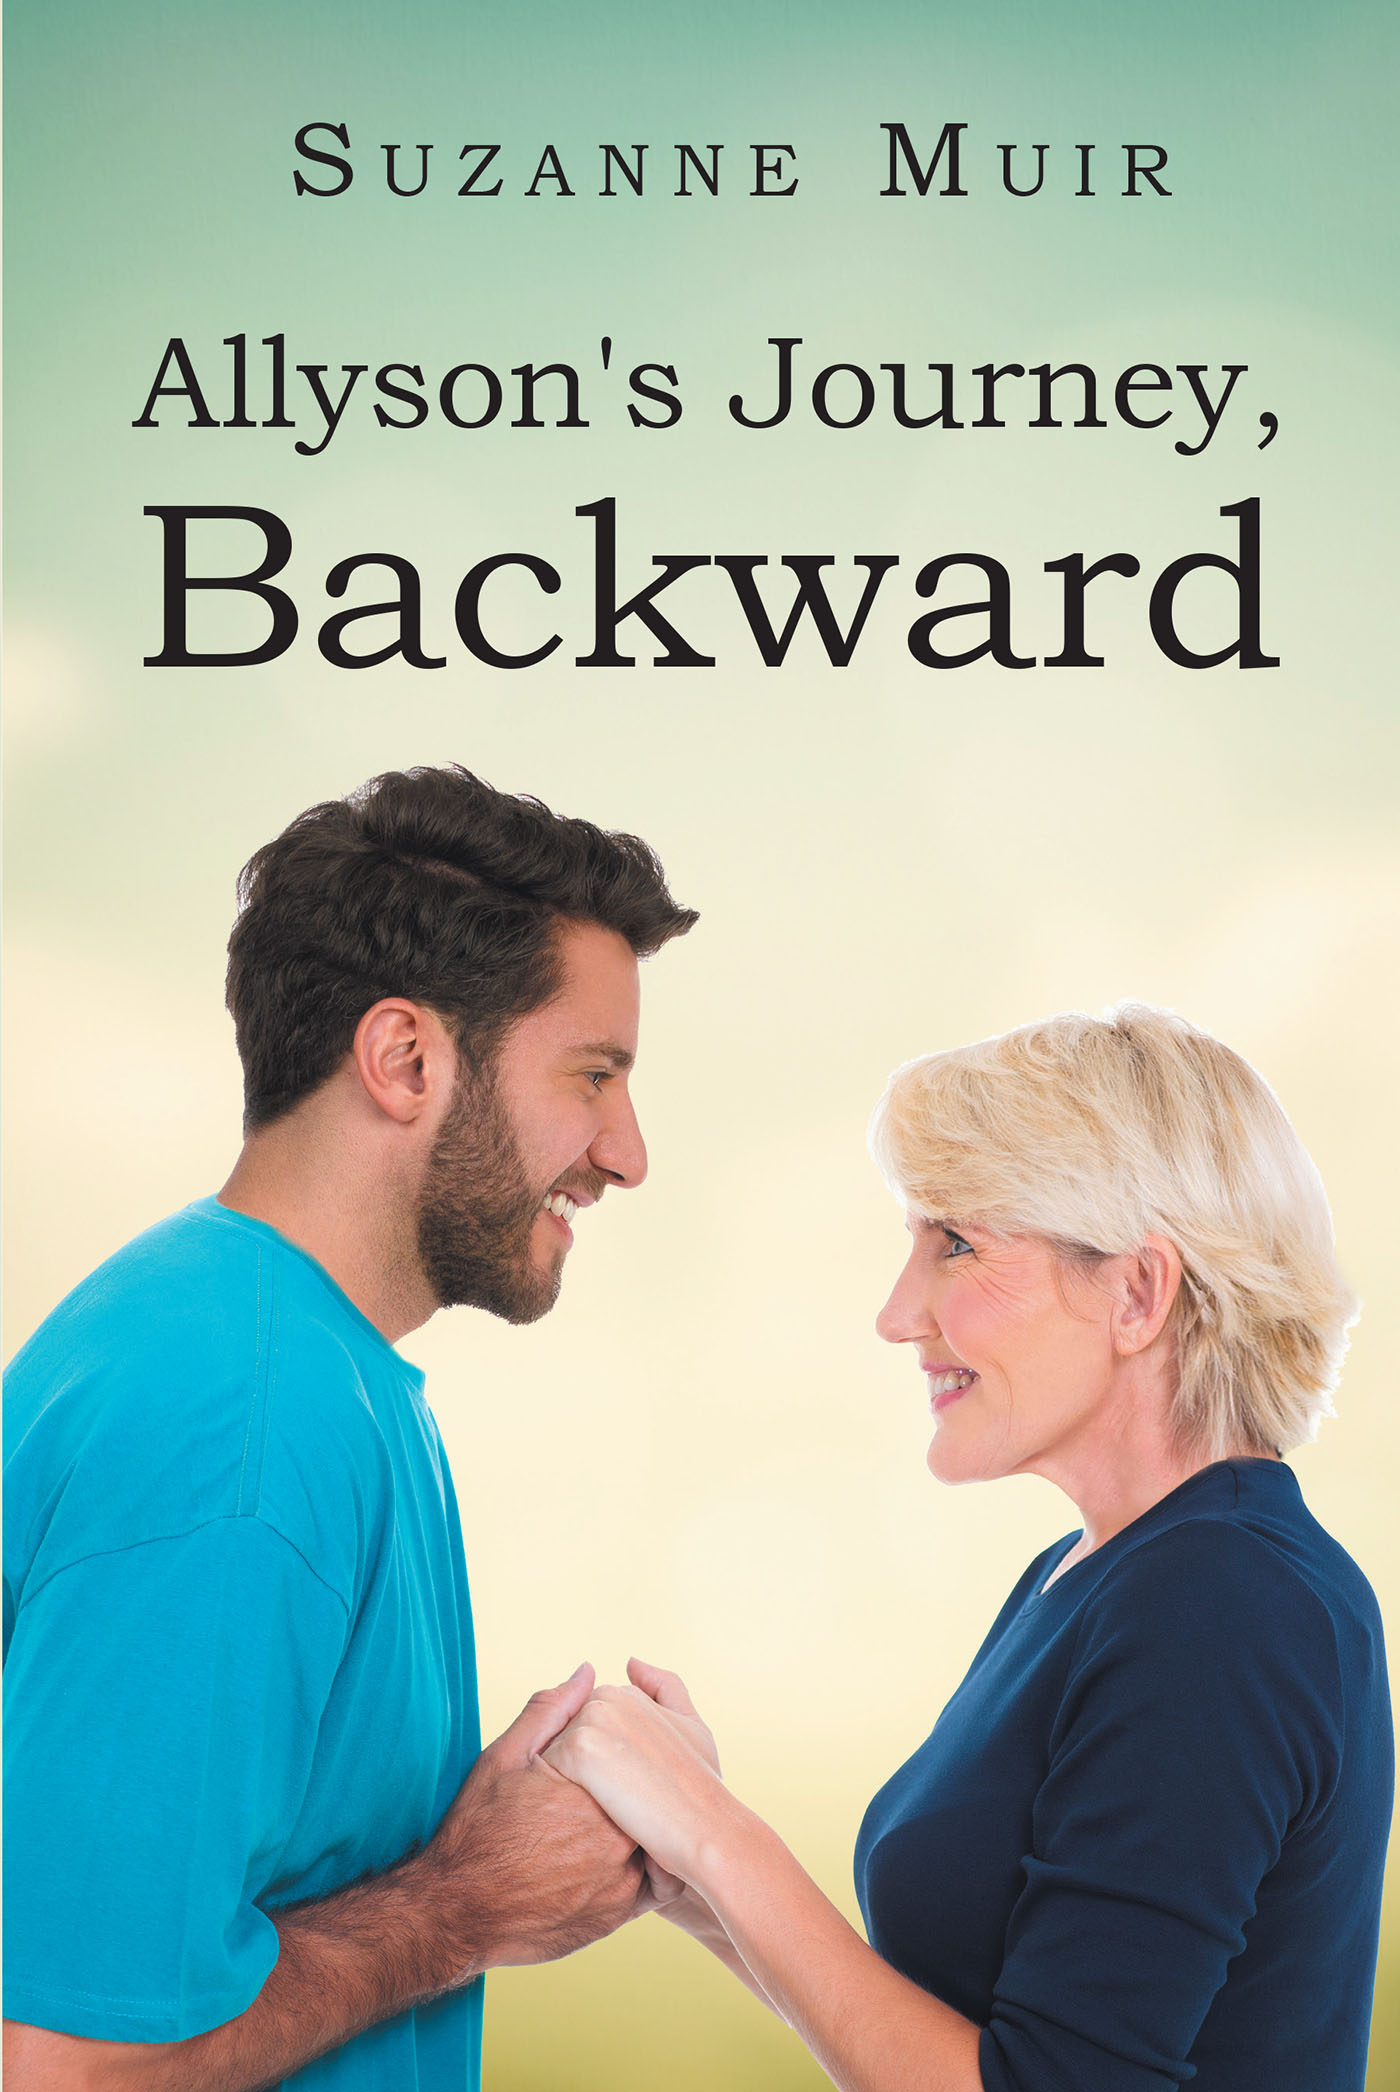 Author Suzanne Muir’s New Book, "Allyson's Journey, Backward," Centers Around a Woman Whose Past Choices Come Back to Give Her the Chance to Make Things Right